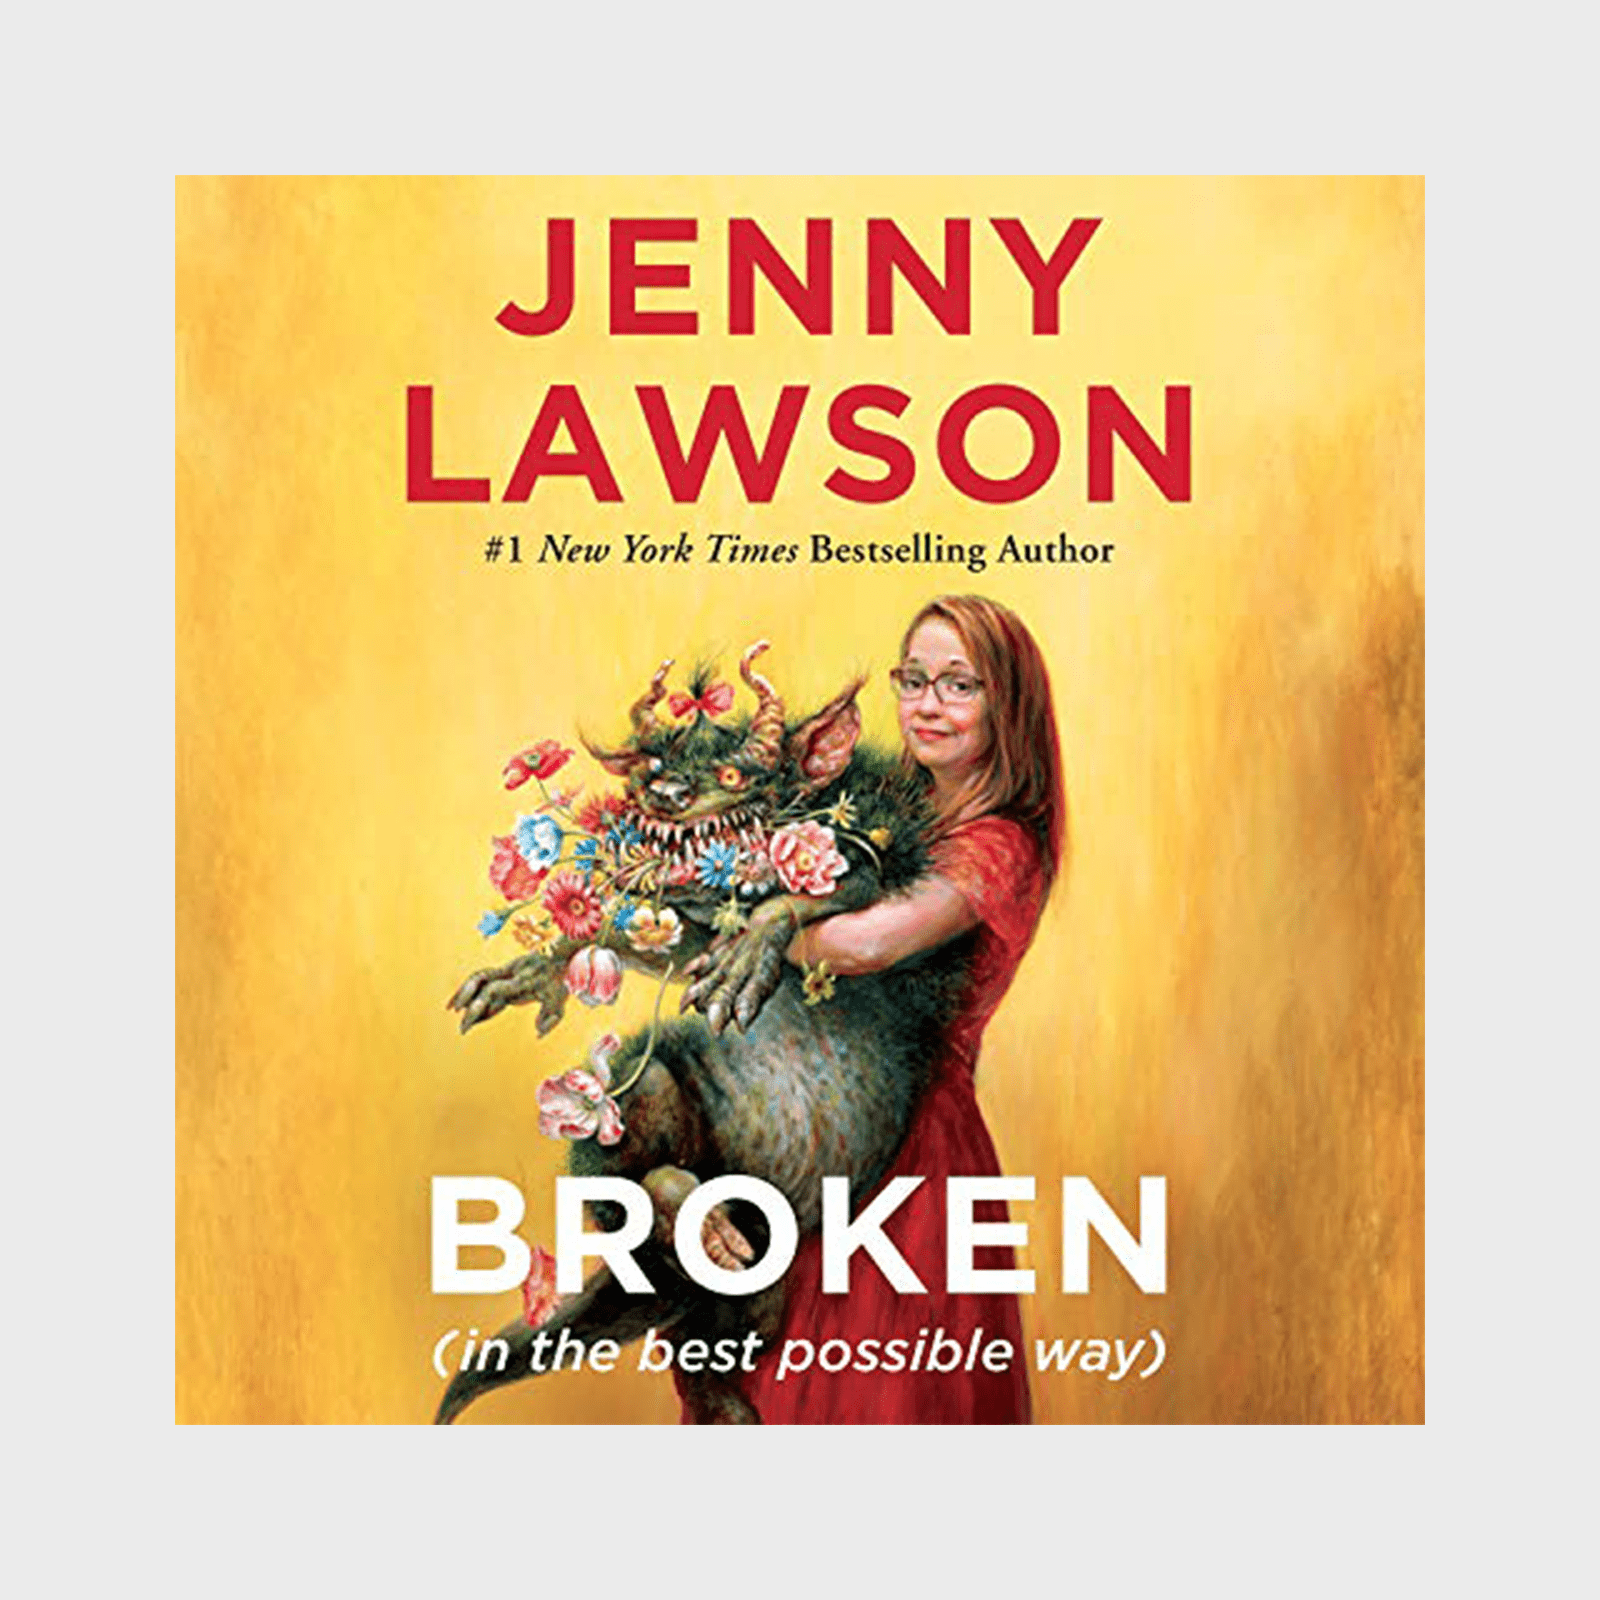 <h3 class=""><strong><em>Broken (in the Best Possible Way) </em>by Jenny Lawson</strong></h3> <p>In <a href="https://www.amazon.com/Broken-Best-Possible-Way/dp/B089YW6VLC/" rel="noopener noreferrer"><em>Broken (in the Best Possible Way)</em></a>, Jenny Lawson, aka The Blogess, narrates her experiences living with mental illness, and she does it in the most candid, humorous, and relatable way possible. Laugh out loud as Lawson shares ideas she'd like to pitch to <em>Shark Tank</em>, argues why she is more full-grown mammal than actual adult, and lets you know that it's totally okay to eat floor onion rings because, at the end of the day, being who you are, quirks and all, is the best way to be.</p> <p class="listicle-page__cta-button-shop"><a class="shop-btn" href="https://www.amazon.com/Broken-Best-Possible-Way/dp/B089YW6VLC/">Shop Now</a></p>